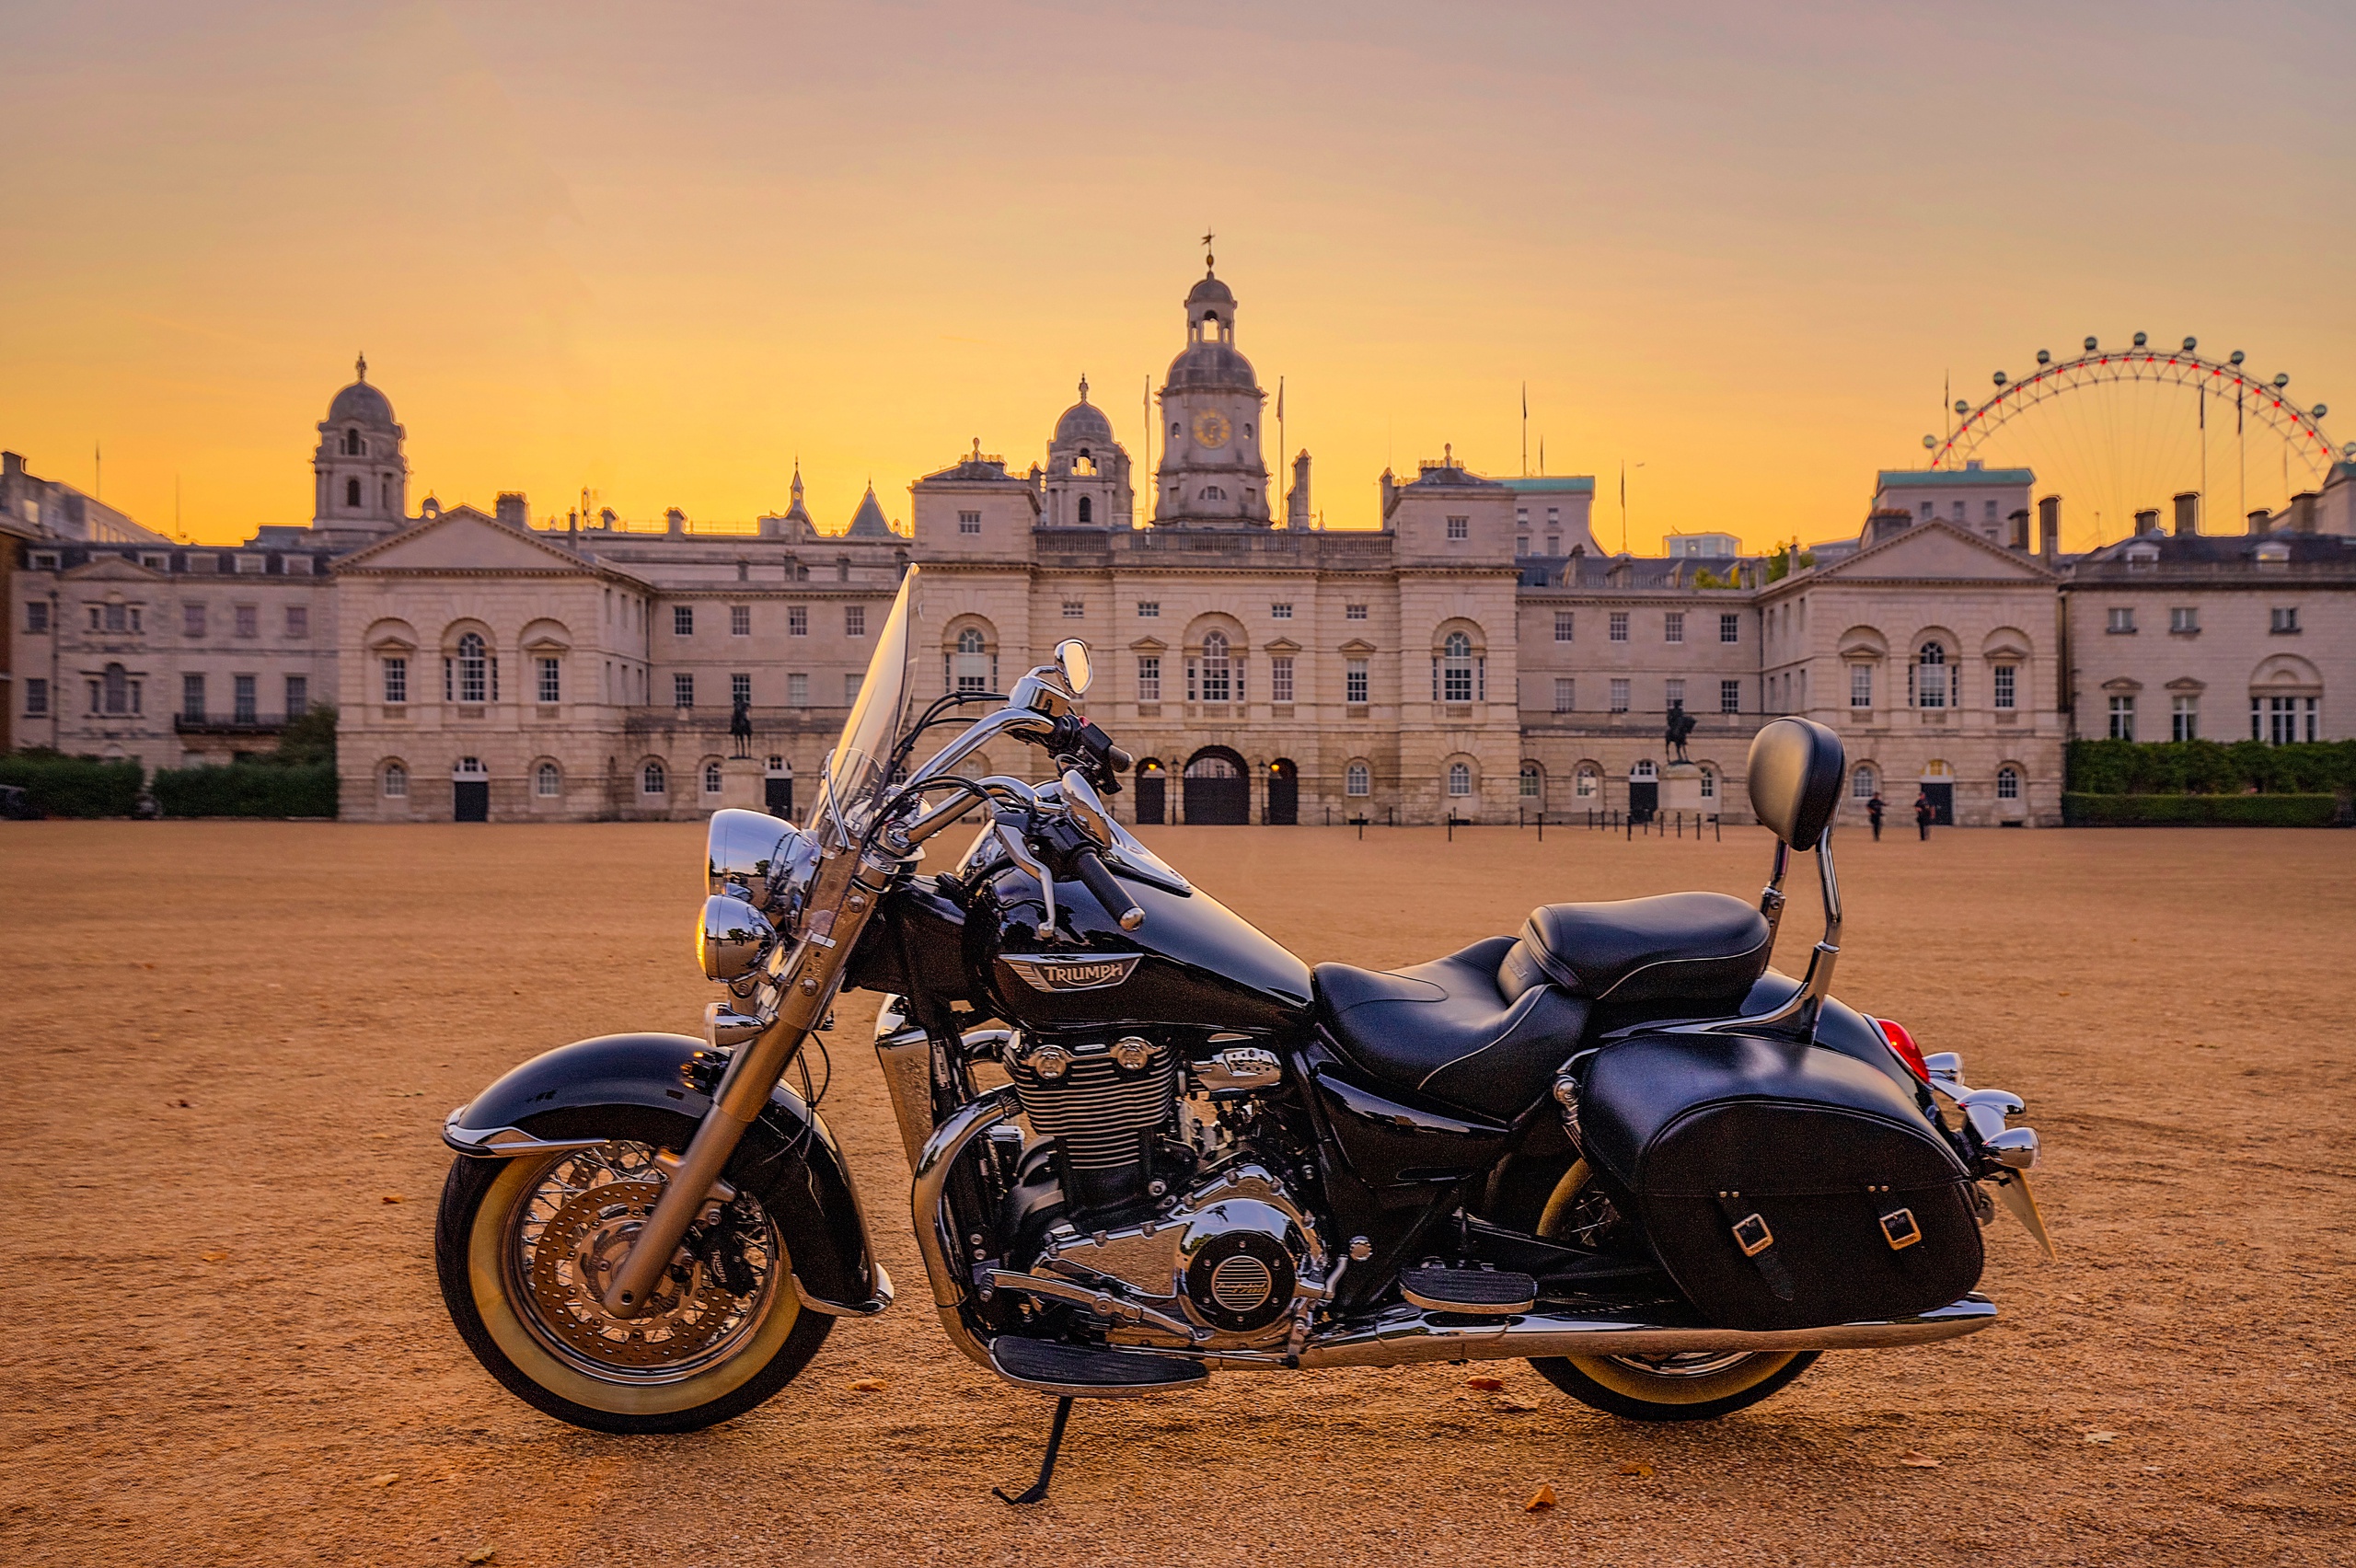 General 2560x1704 building palace vehicle motorcycle Triumph Thunderbird Triumph British motorcycles